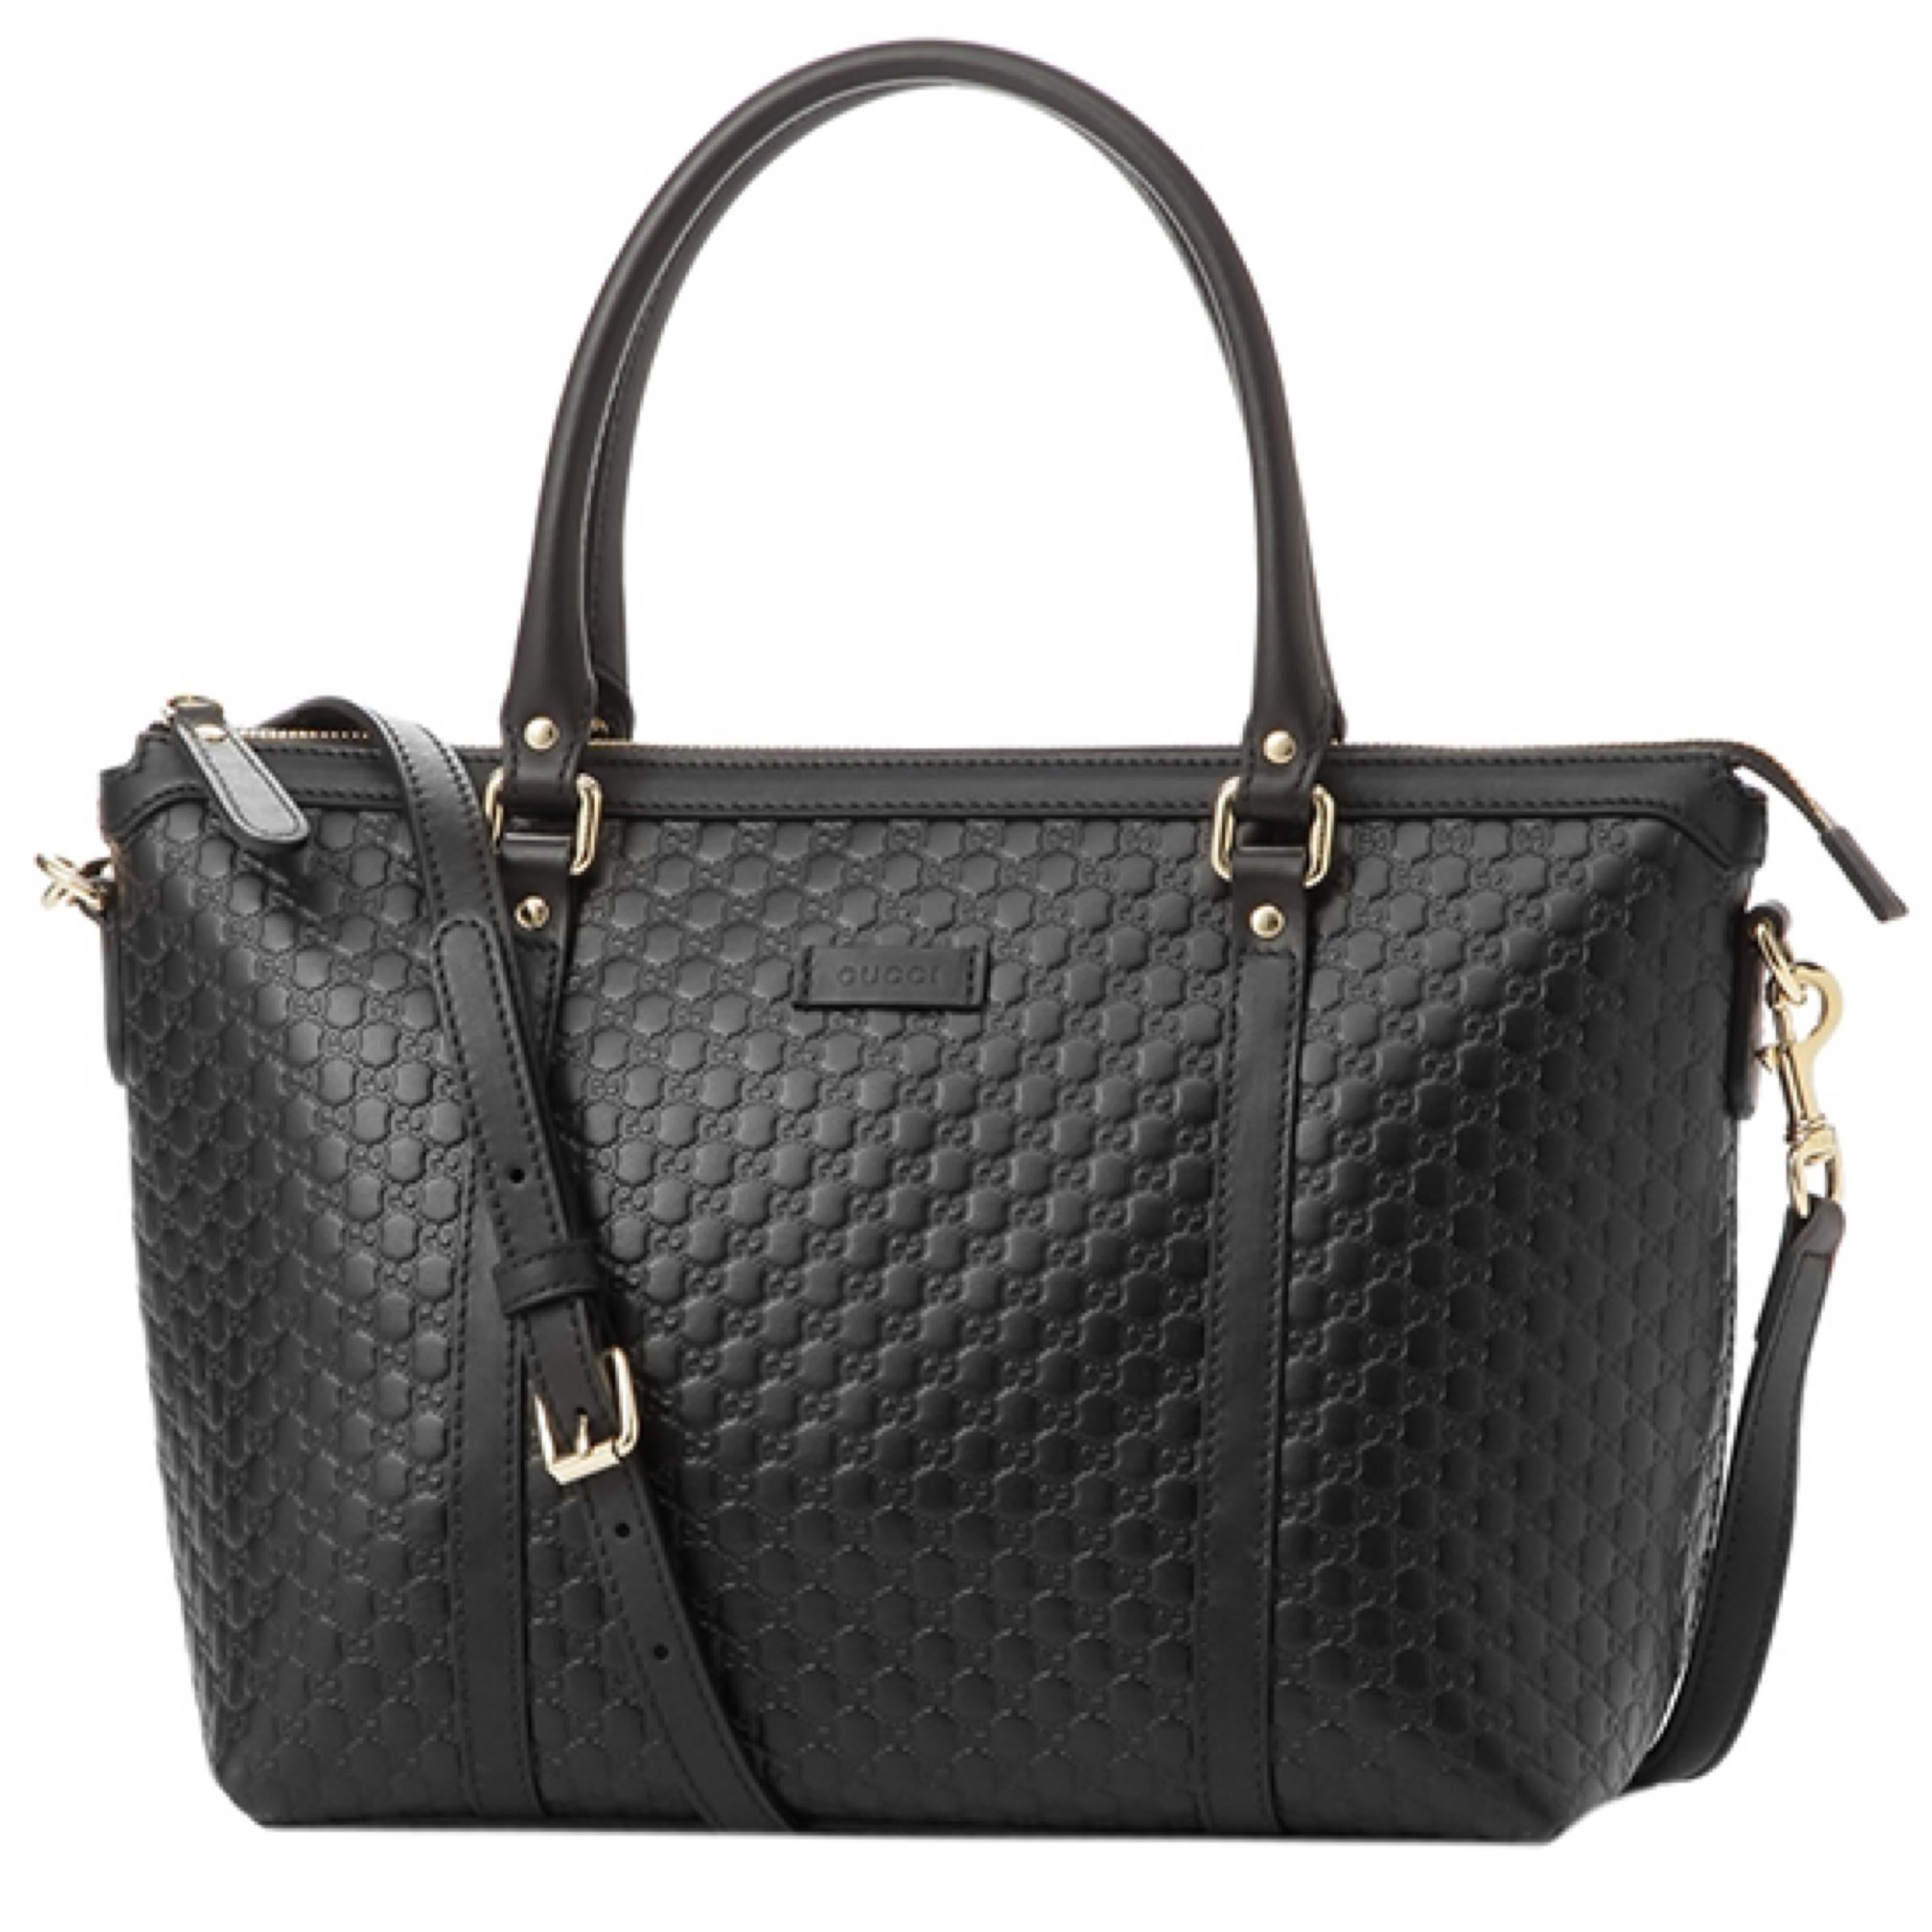 New Gucci Black Leather GG Micro Guccissima Large Tote Crossbody Shoulder Bag In New Condition For Sale In San Marcos, CA